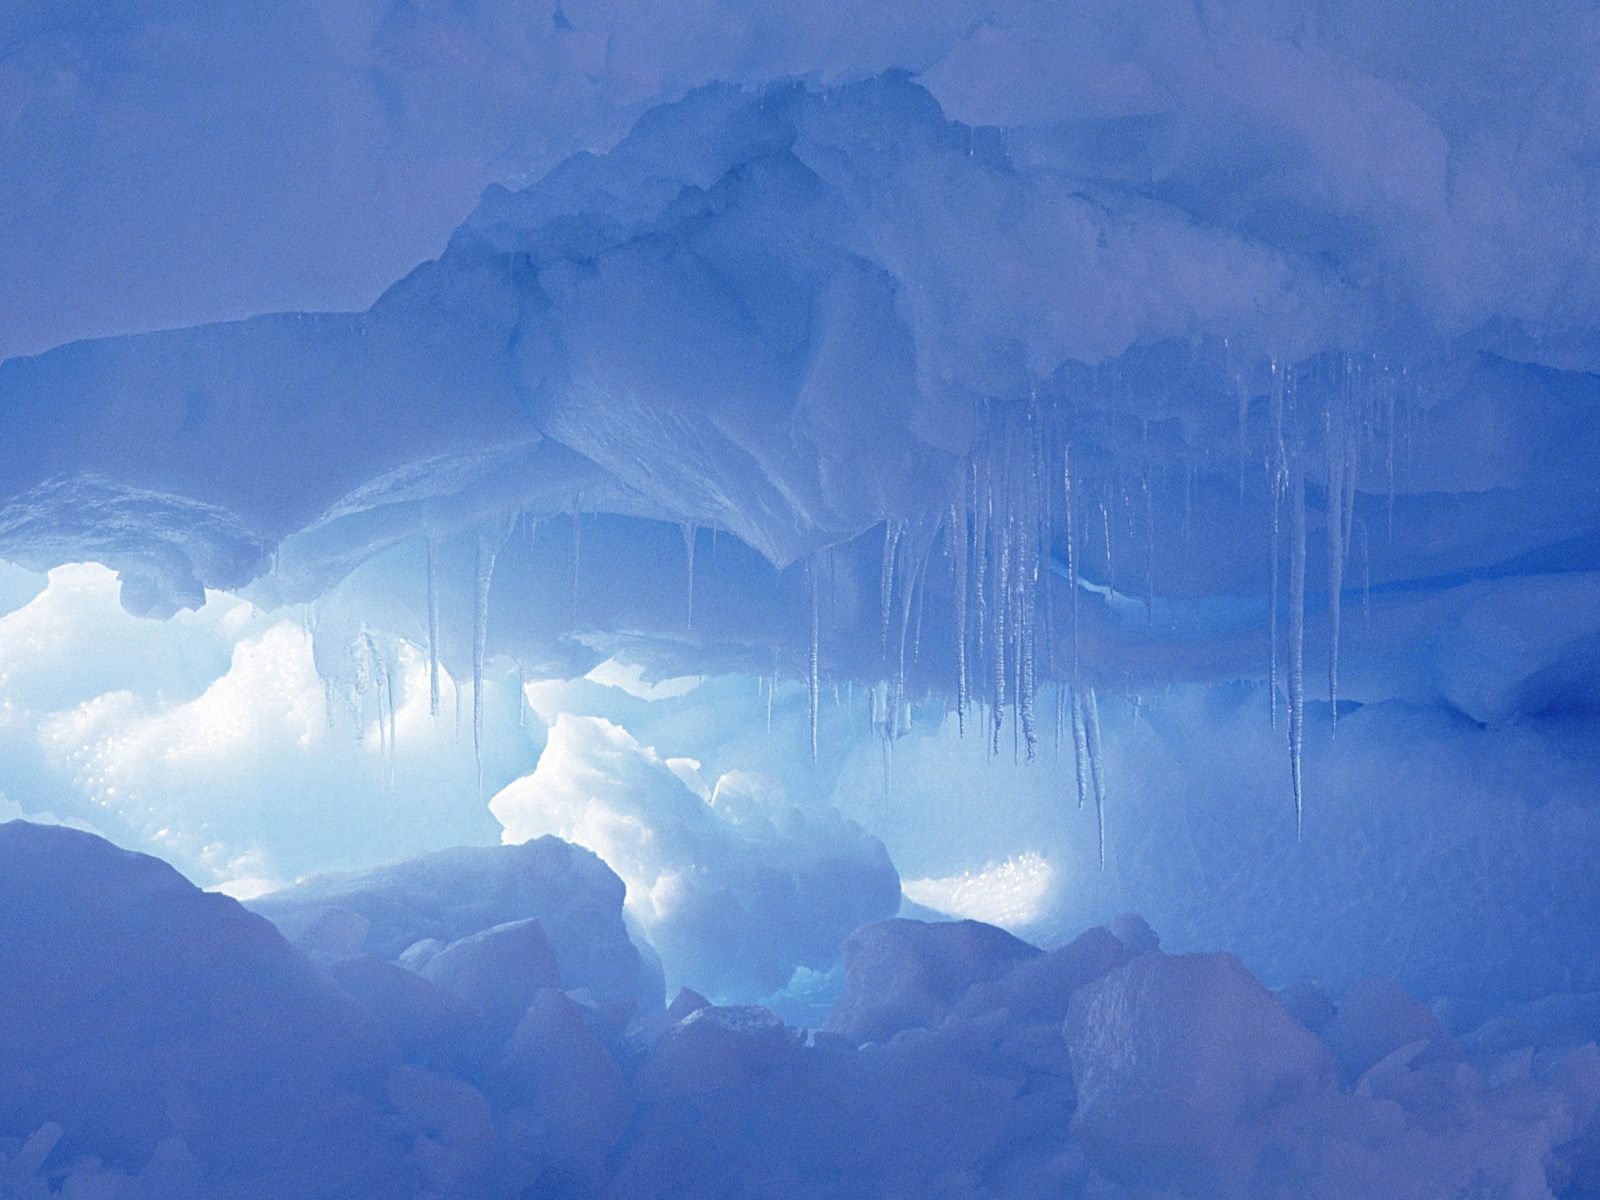 Underground Icicles Weather Wallpaper Image Featuring Snow